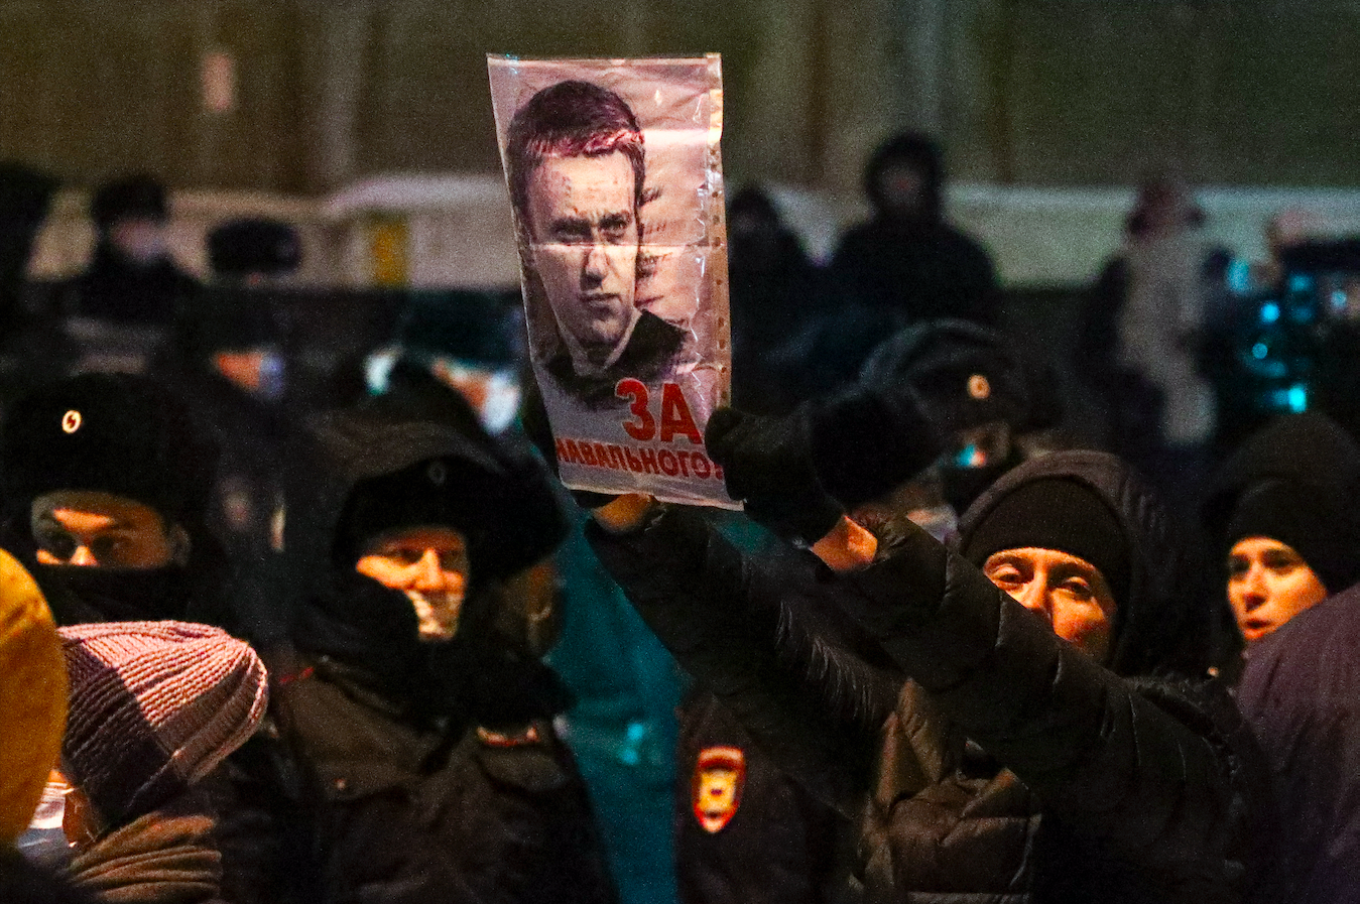 Navalny Urges Russians To ‘Take To The Streets’ Over Jailing